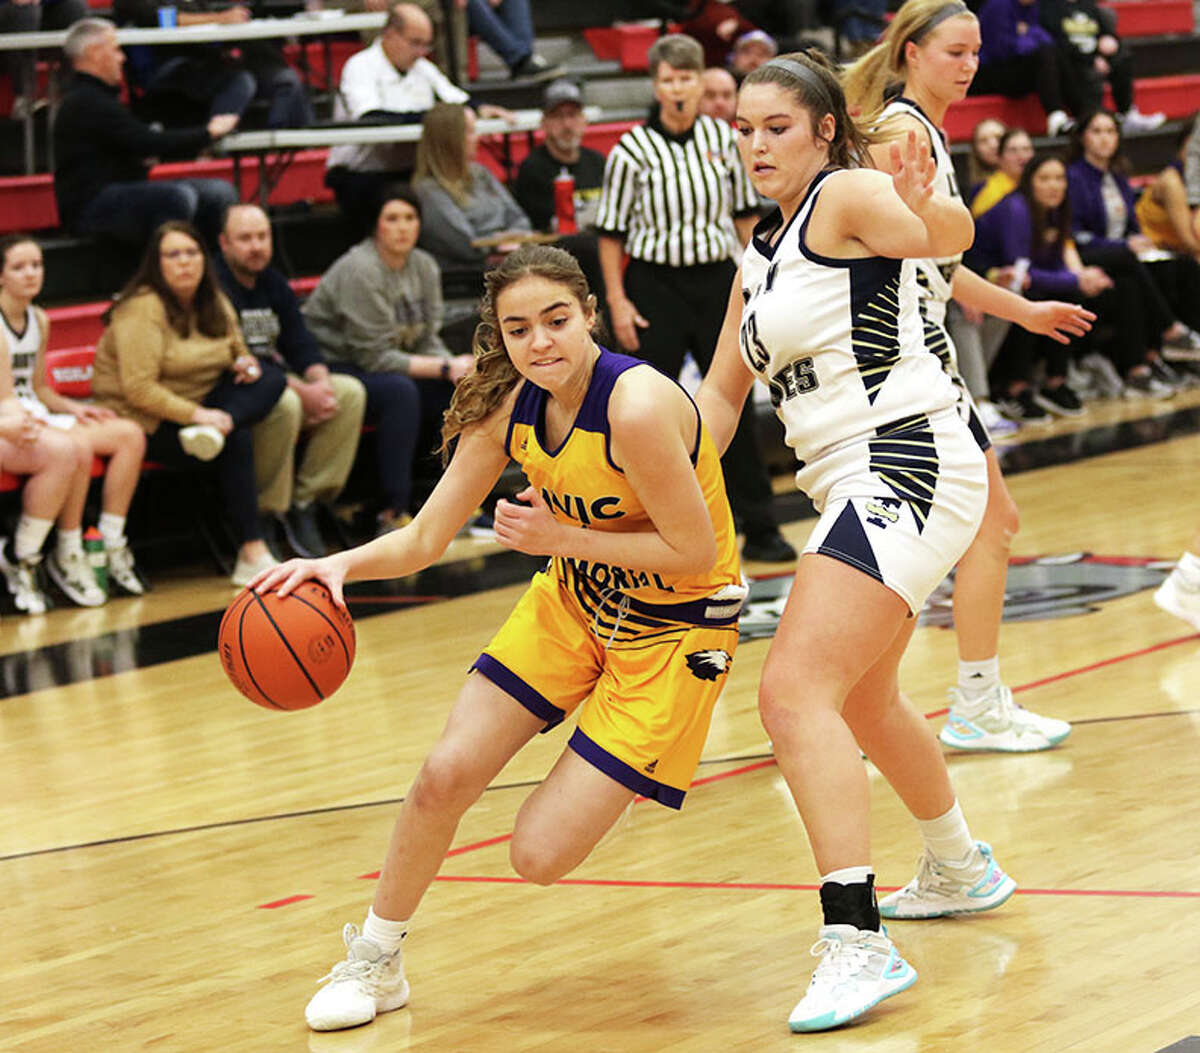 CM's Bella Thien (left) drives past Teutopolis' Kaylee Niebrugge on Saturday in the fifth-place game at the Highland Apex Network Tournament.